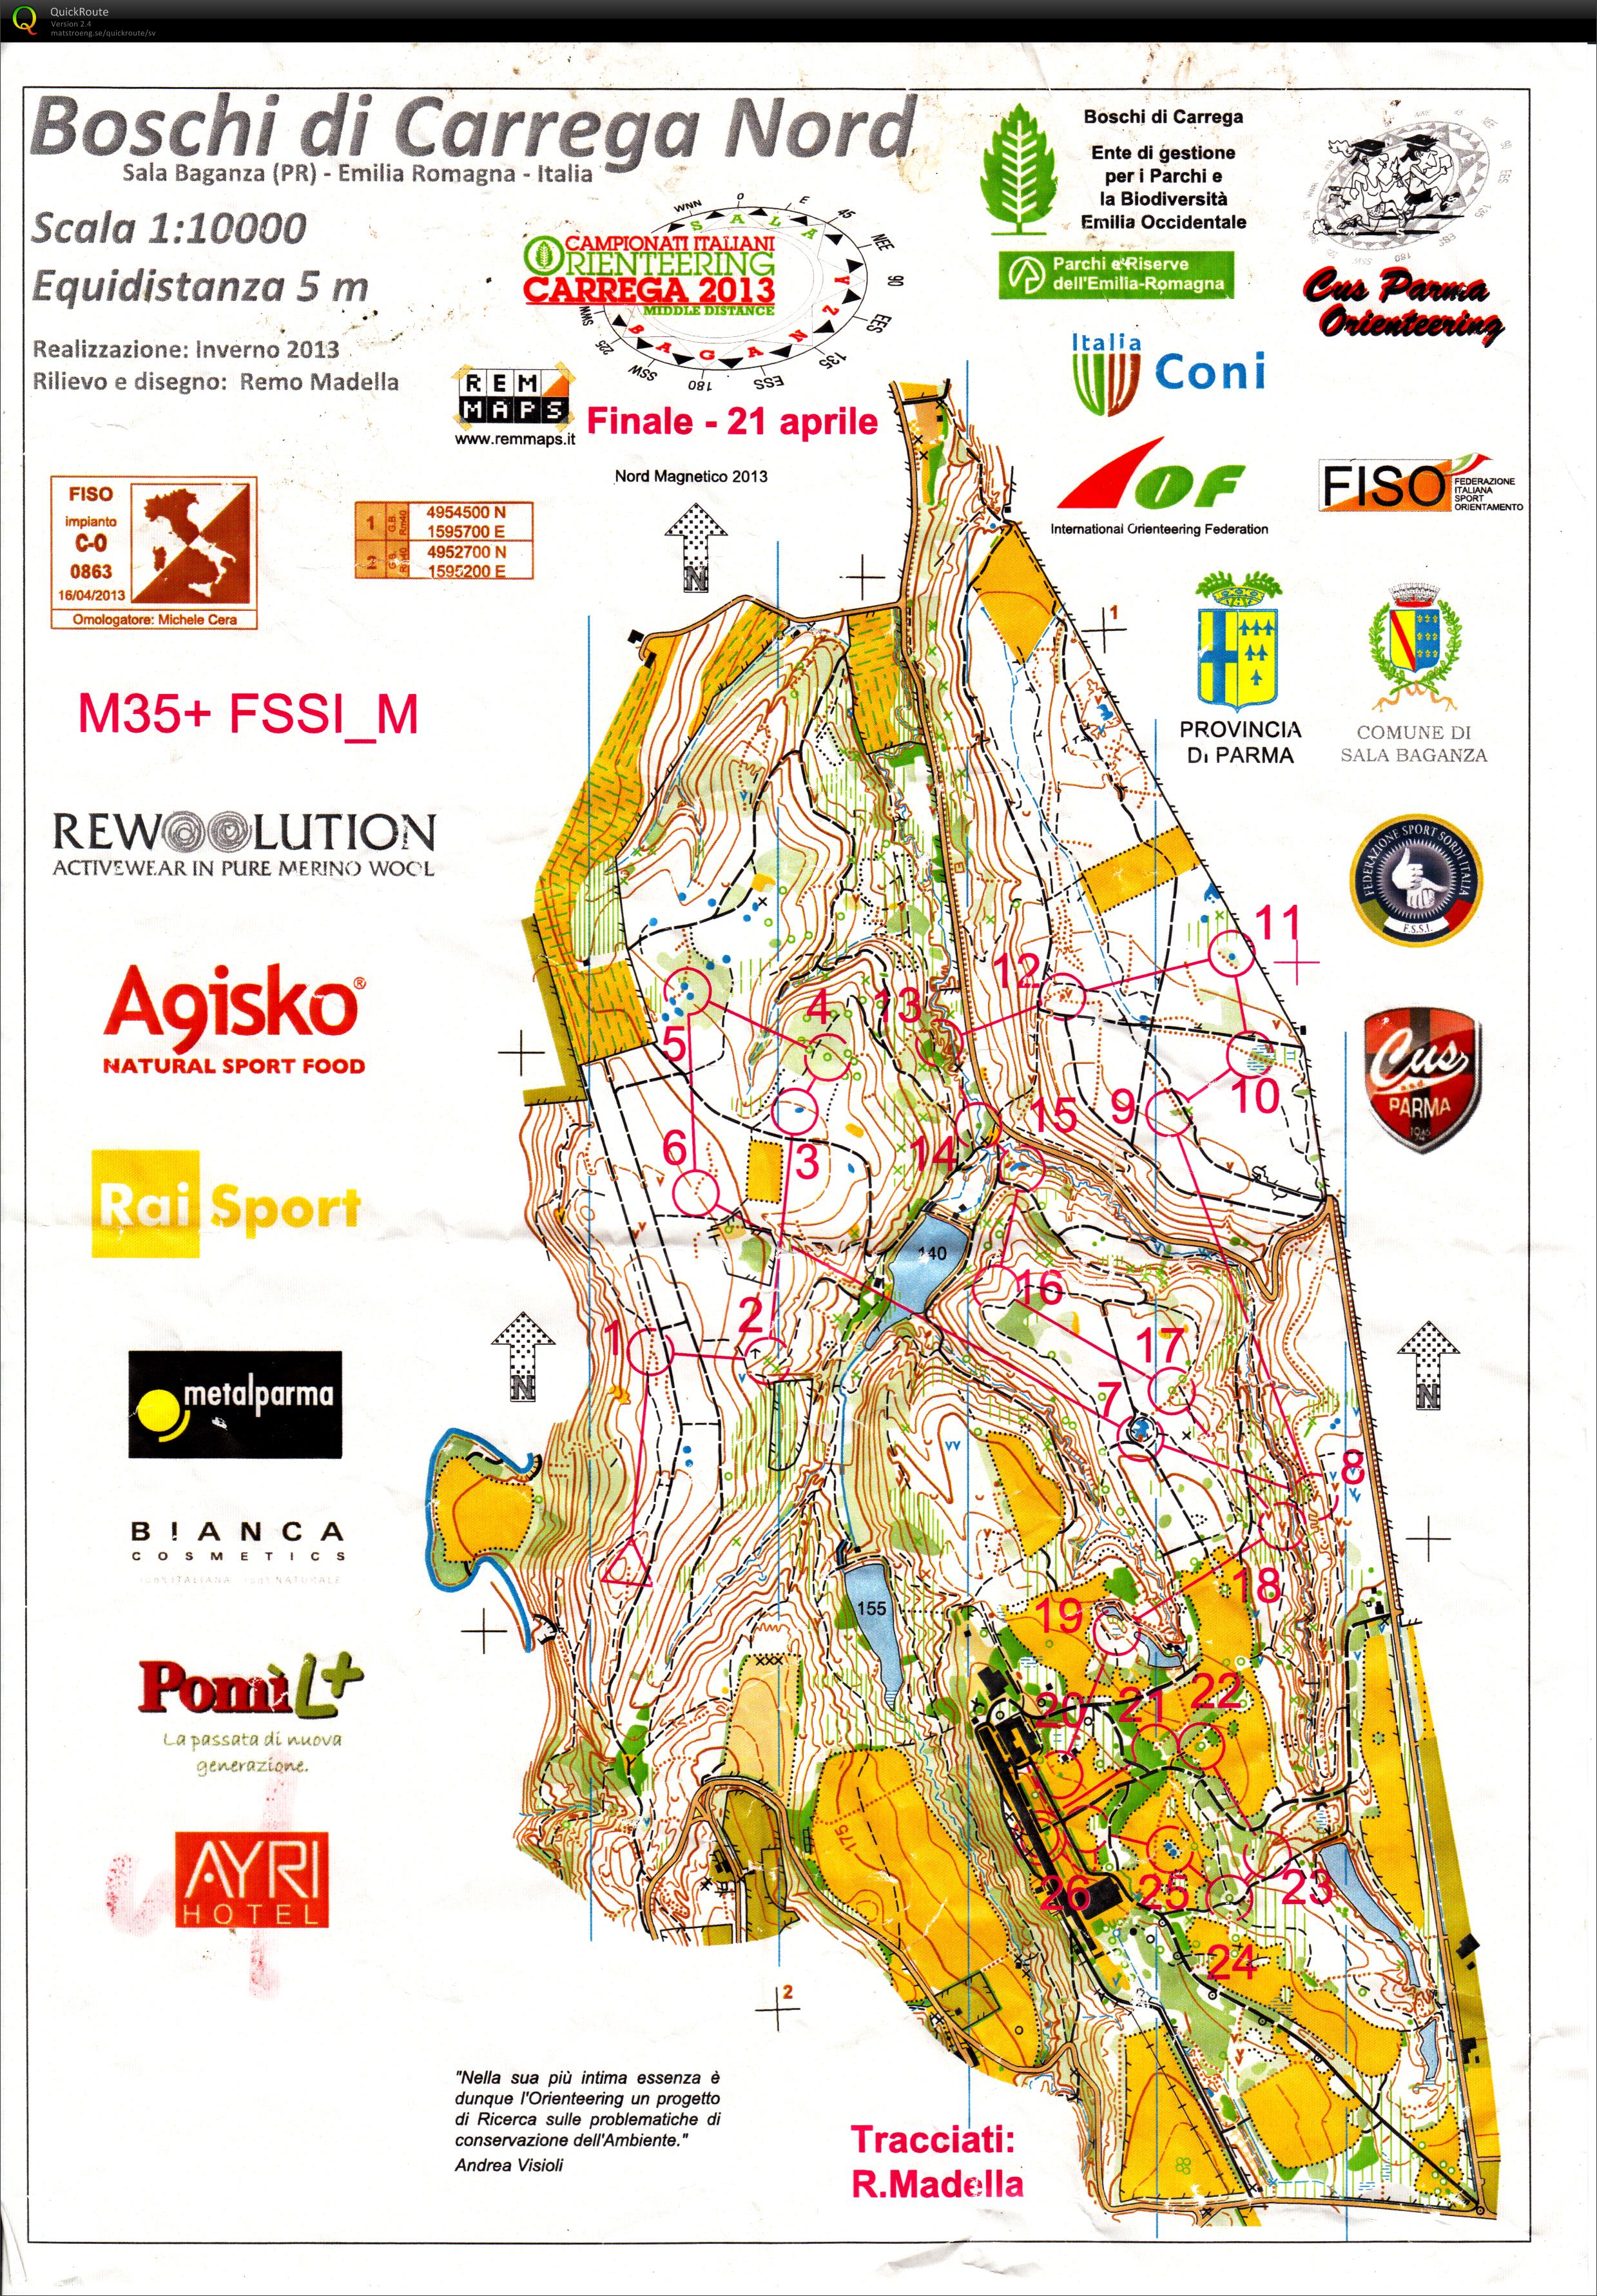 Italian Championship Middle Distance Final (21-04-2013)